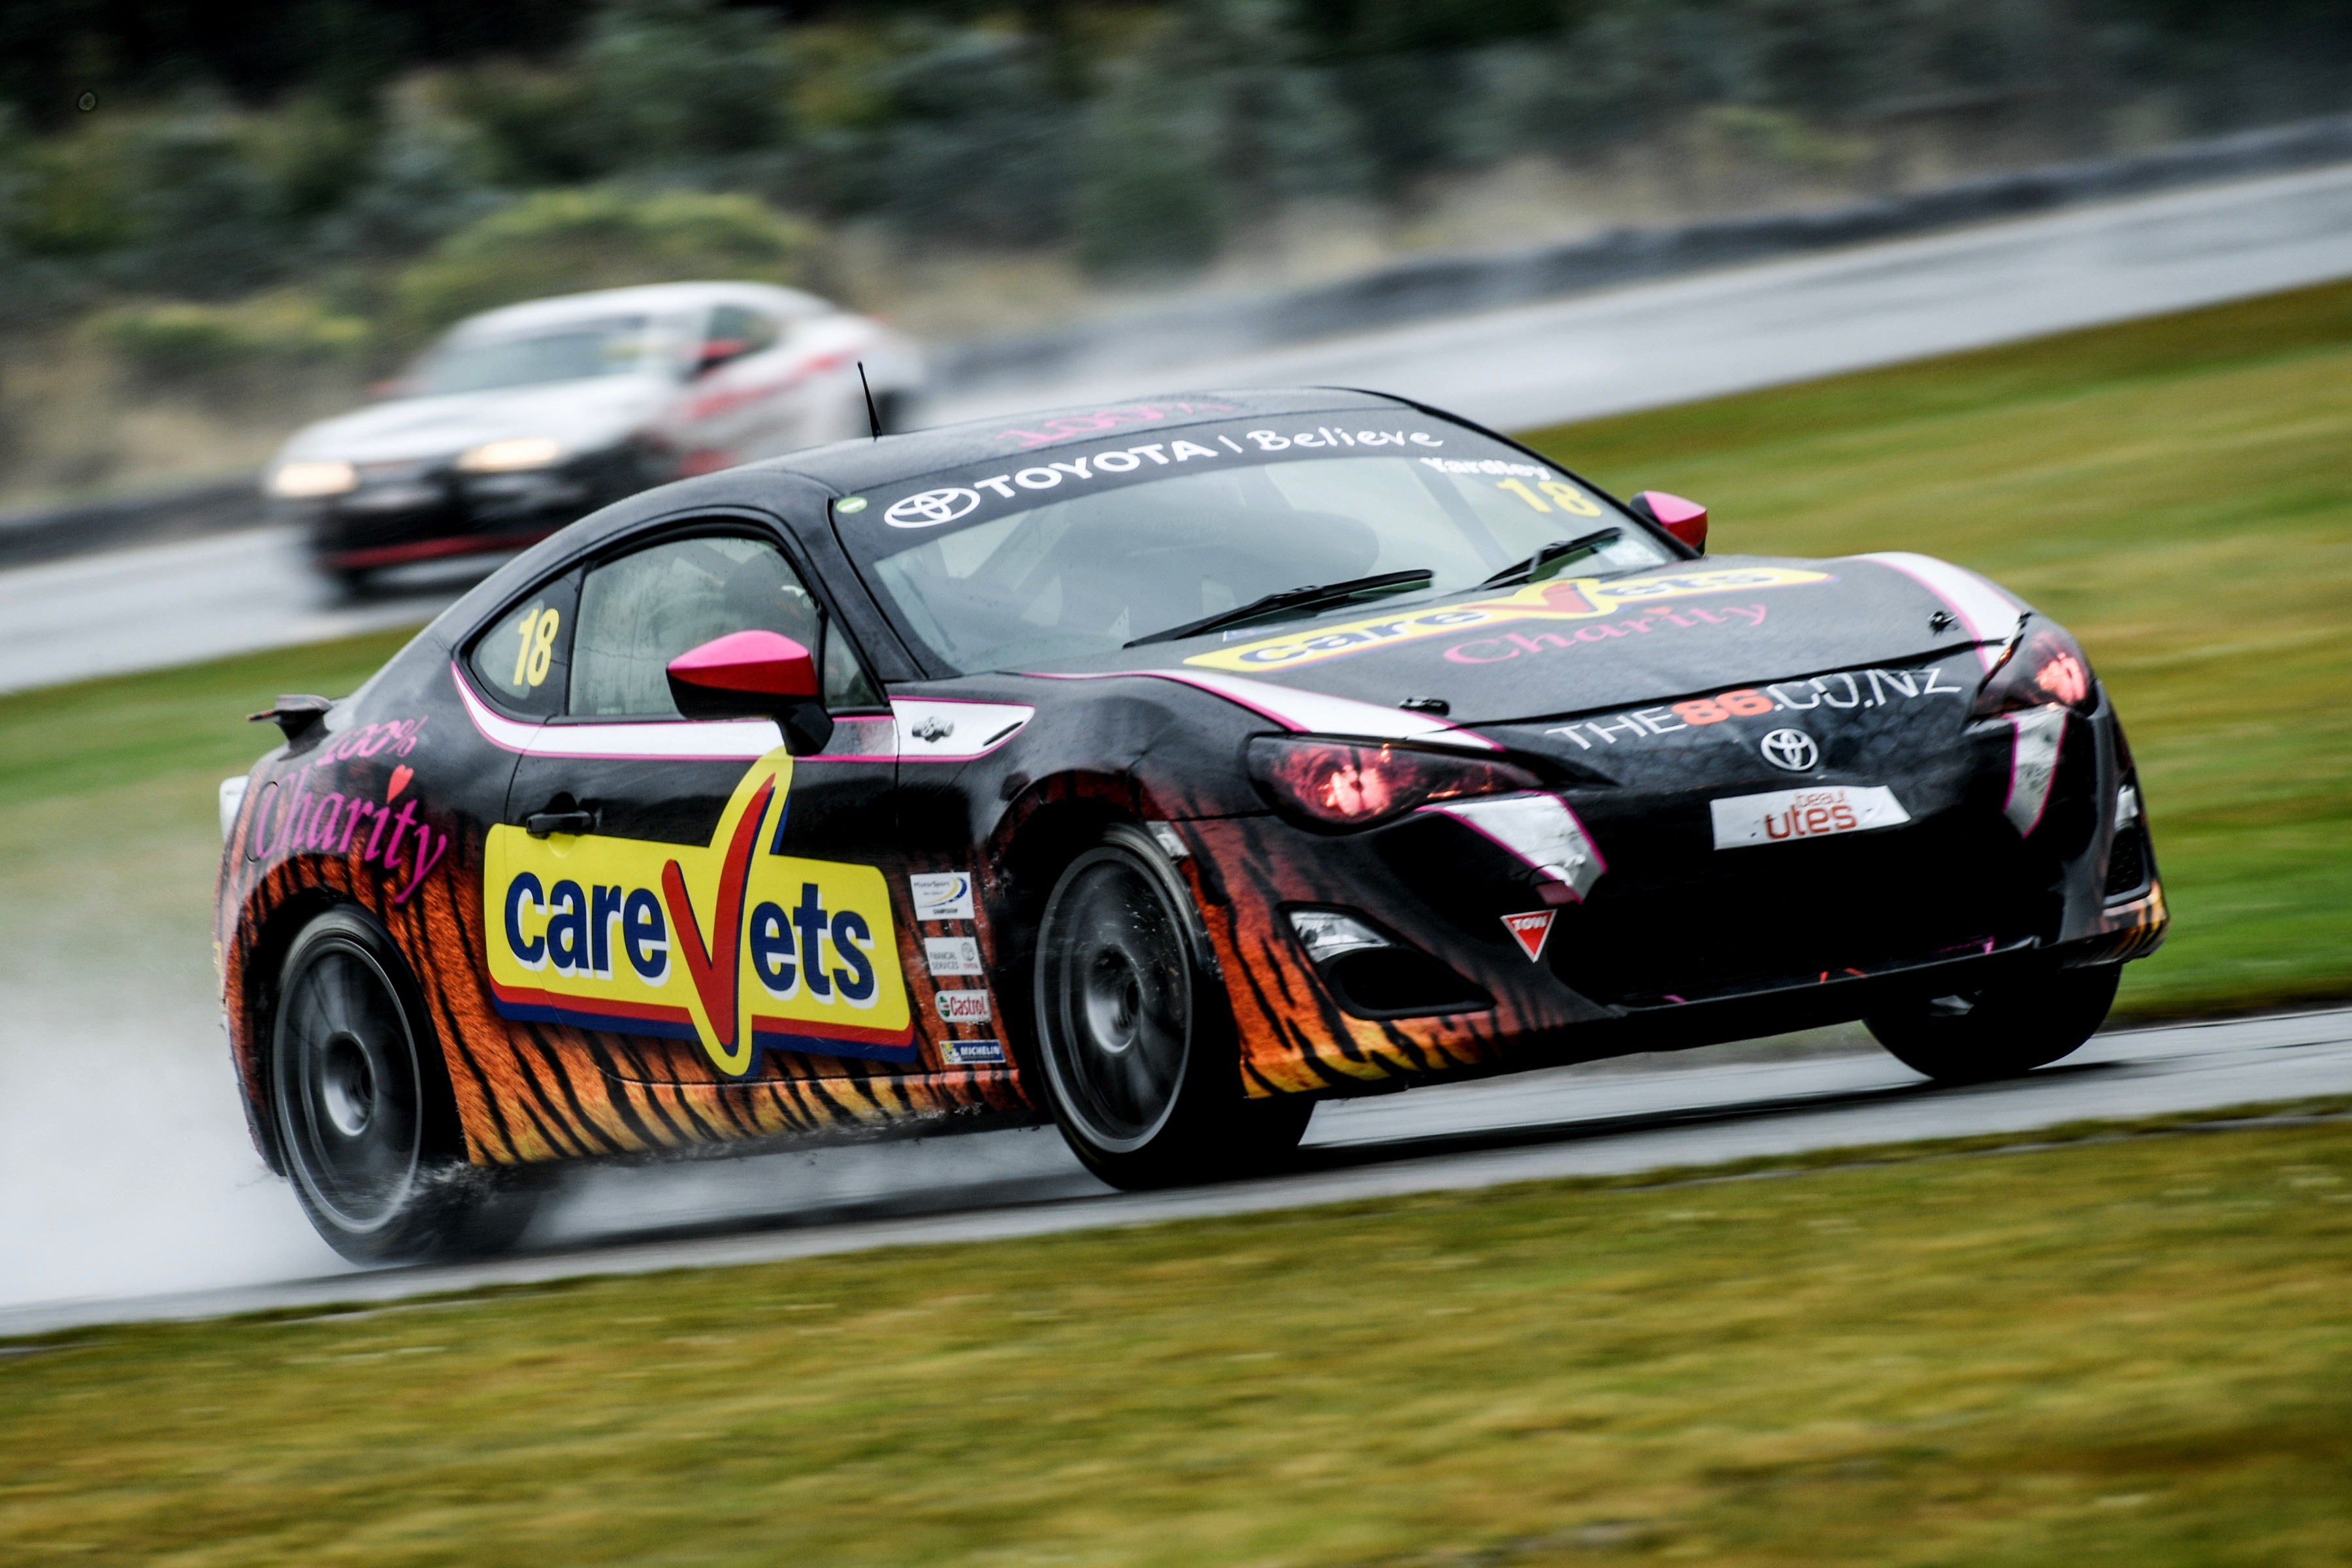 CareVets team clean sweeps Toyota 86 races at Teretonga